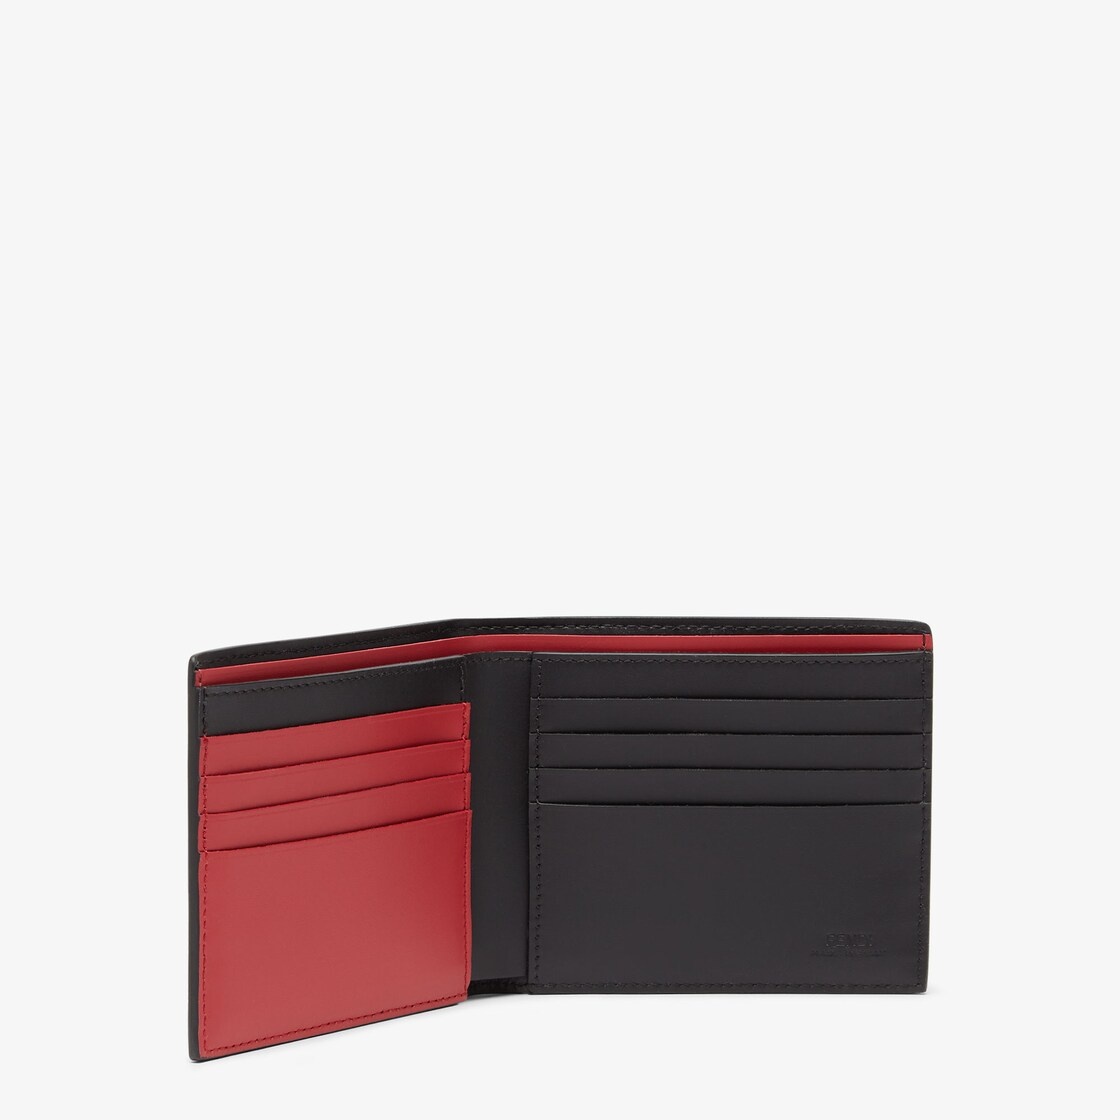 Wallet with eight interior card slots and two compartments for banknotes. Made of black leather with - 3